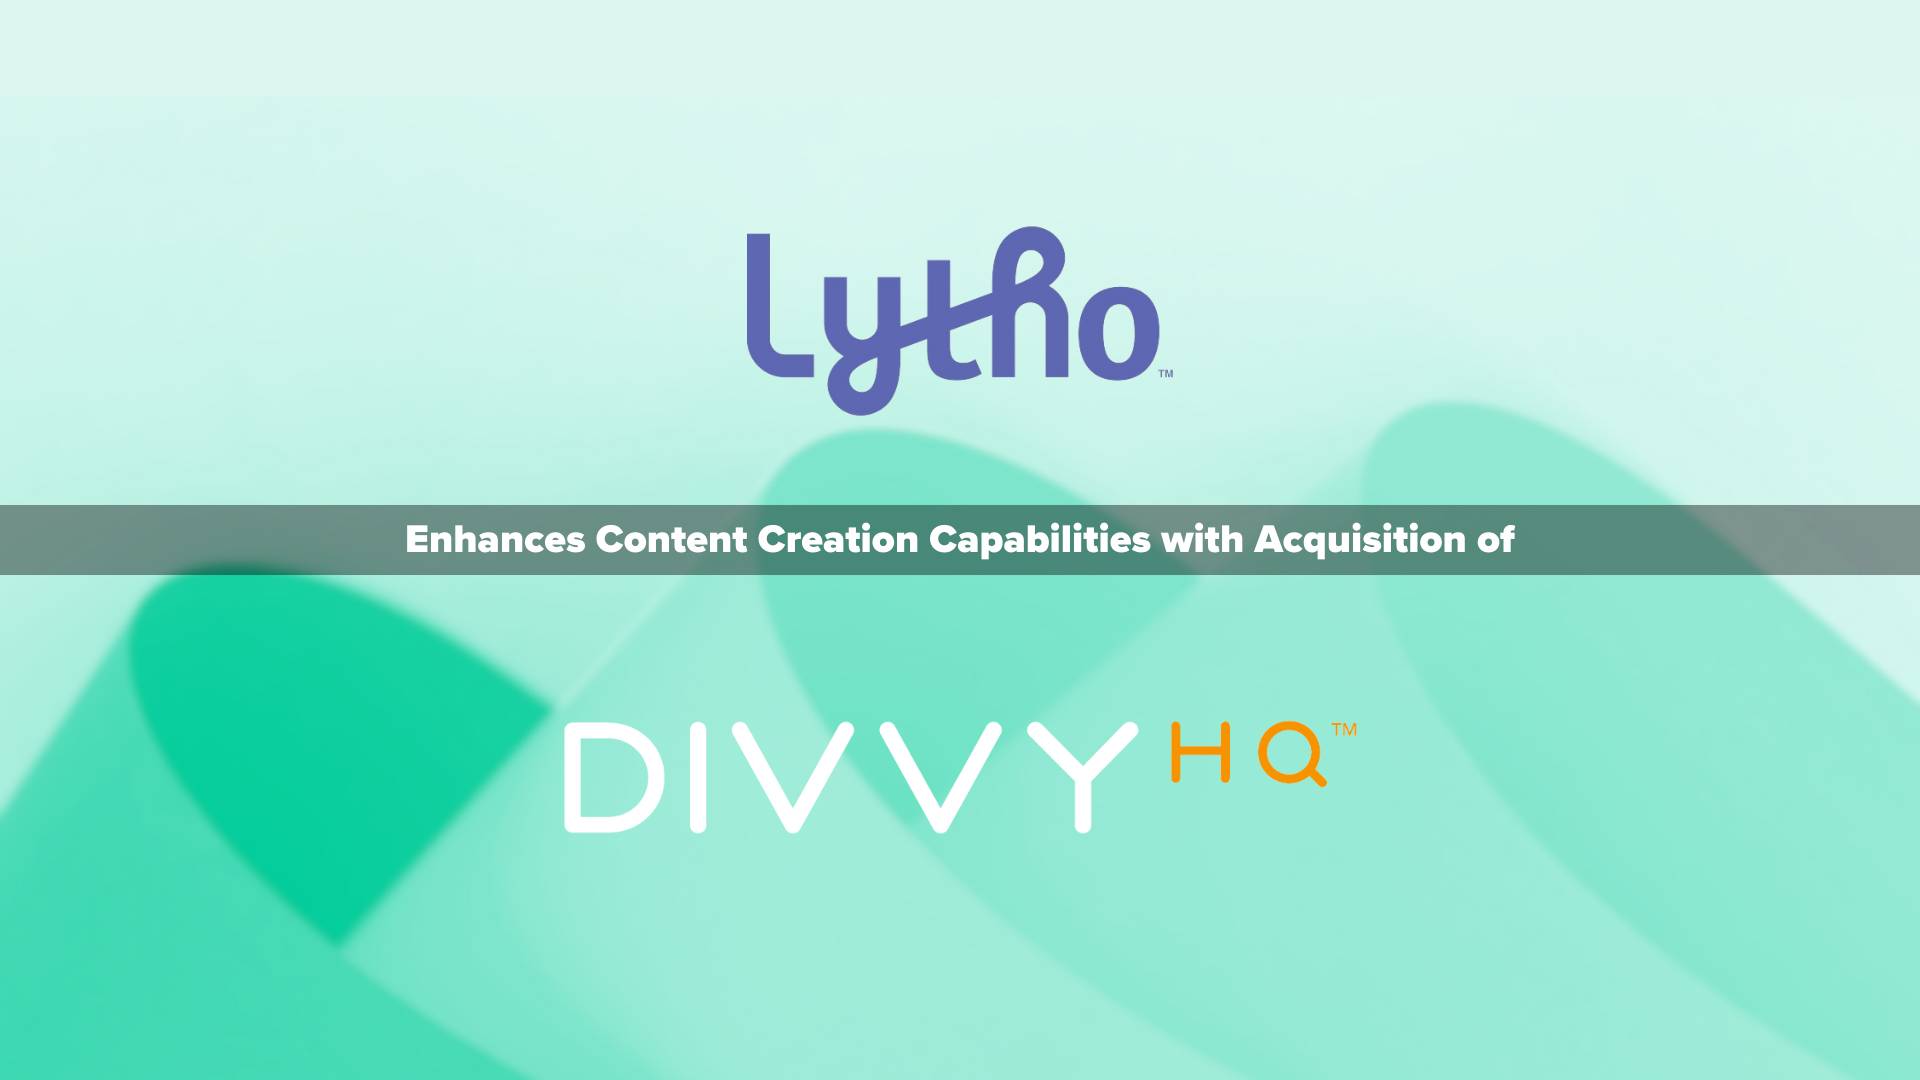 Lytho Enhances Content Creation Capabilities with Acquisition of DivvyHQ